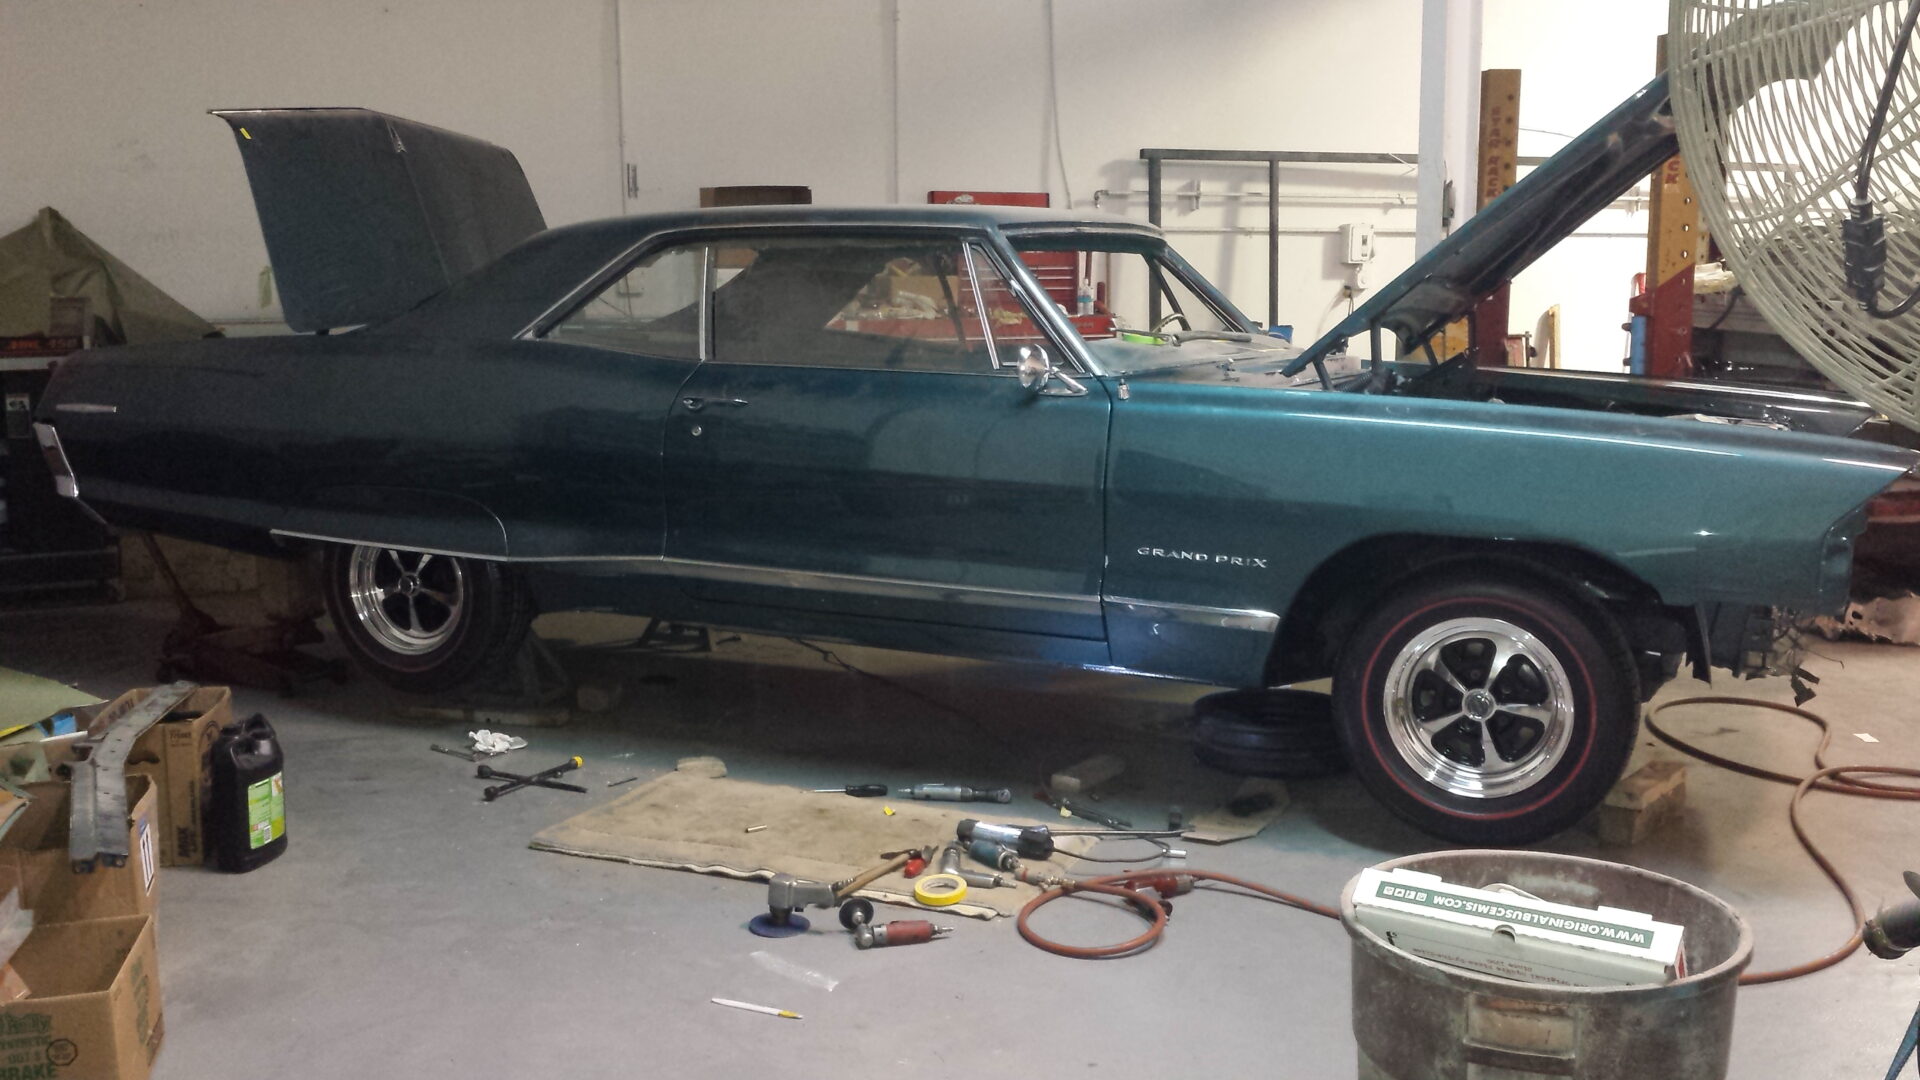 A partially completed 1965 Pontiac Grand Prix